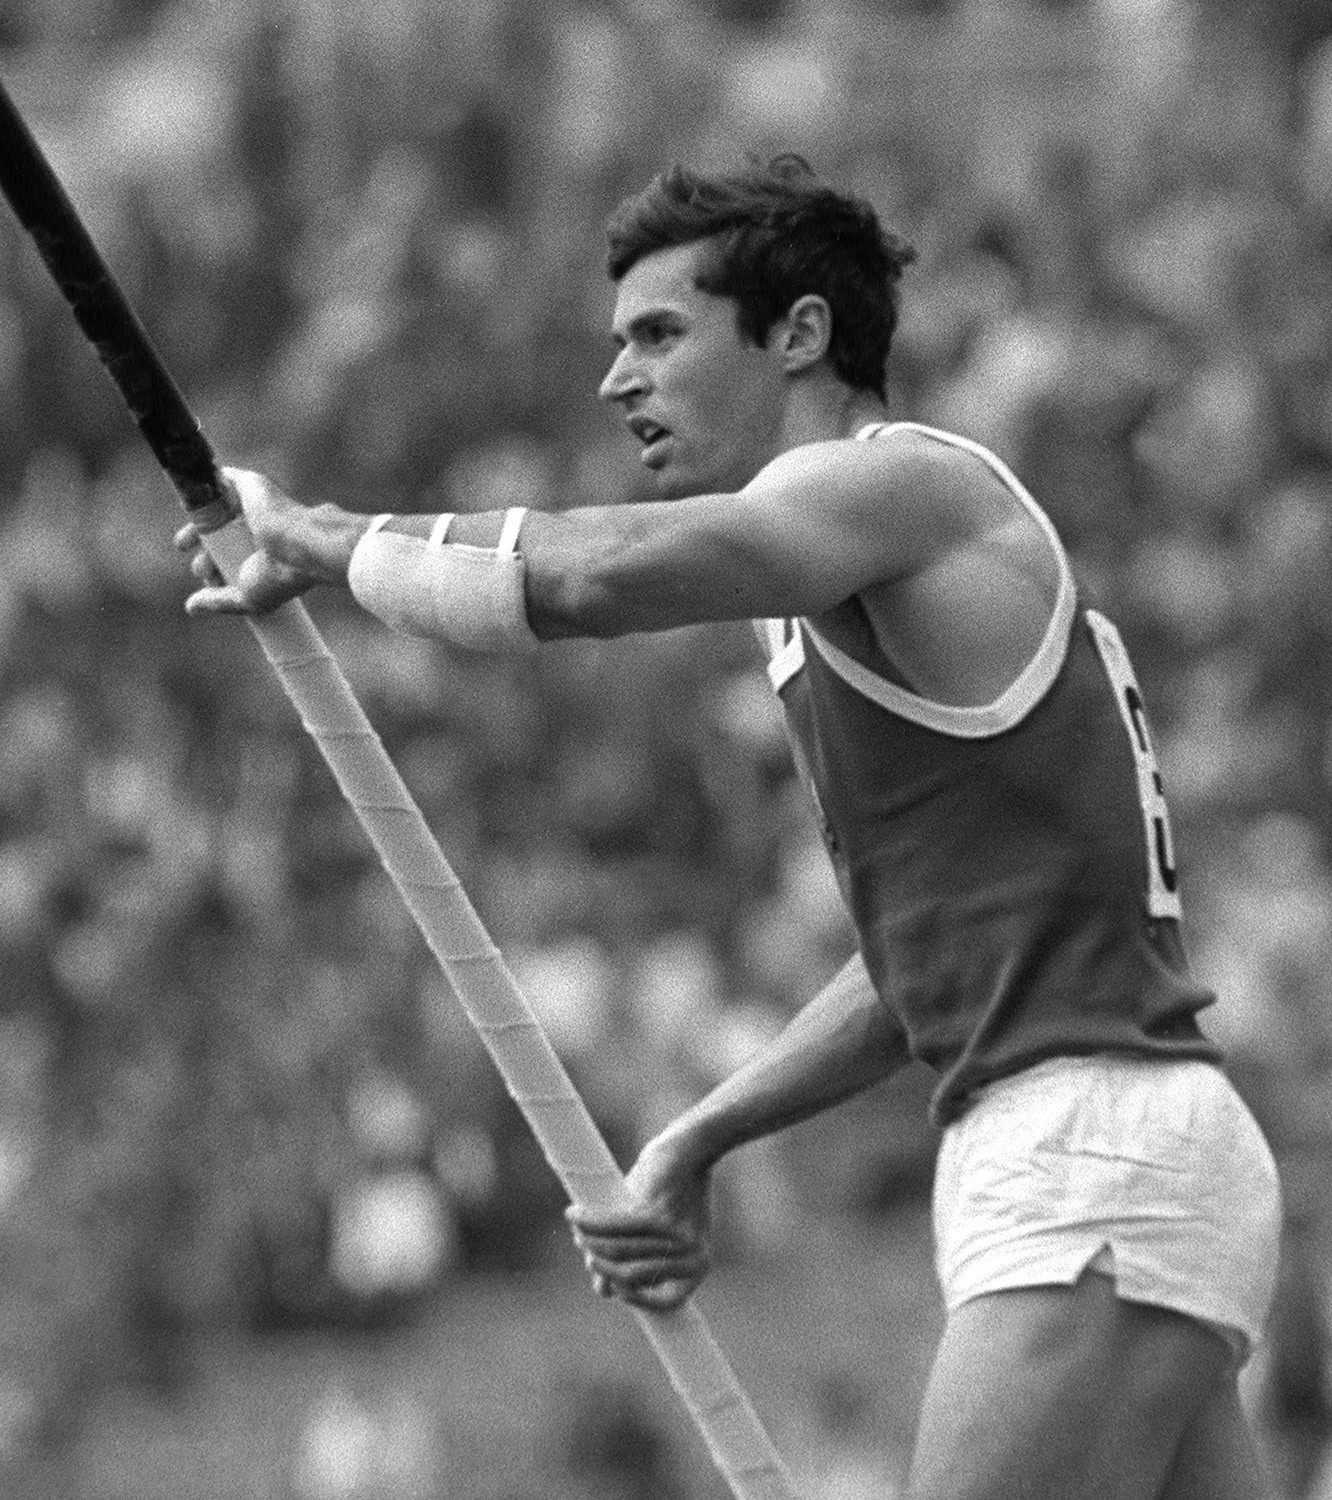 Another long  American winning streak ended in Munich as Wolfgang Nordwig of East Germany took gold in men's pole vault ©Getty Images